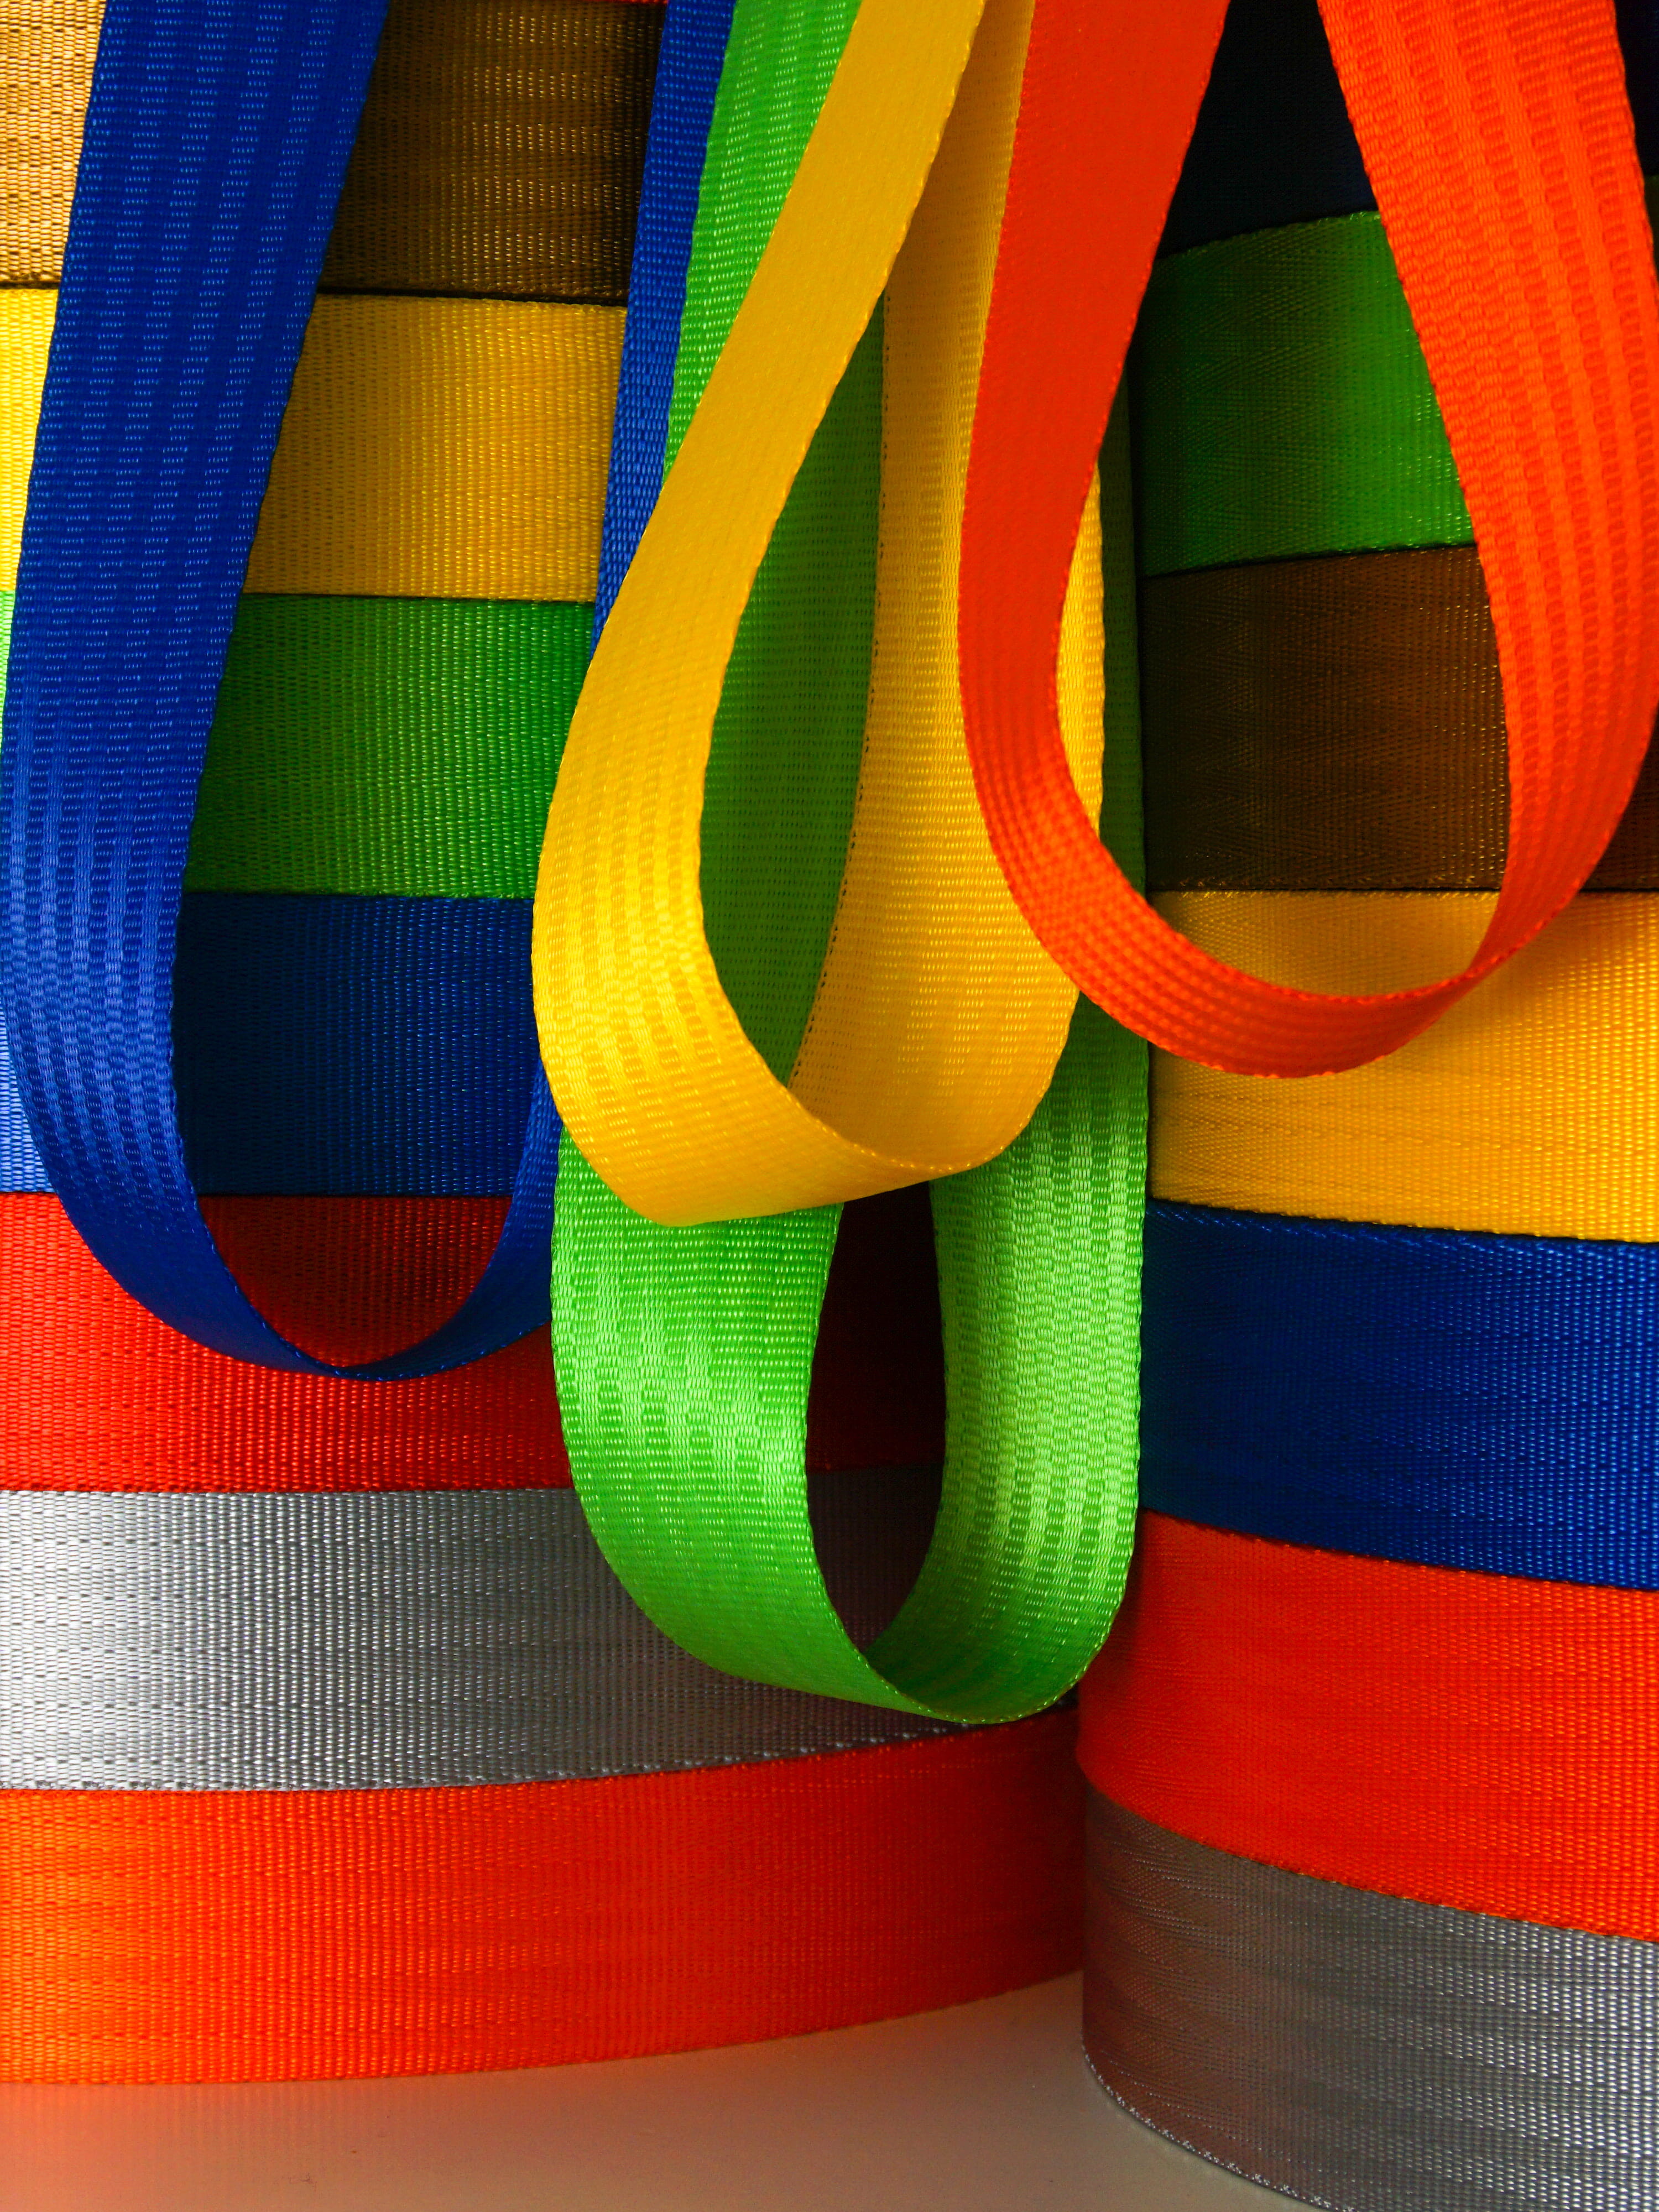 Custom 1inch nylon tubular webbing Manufacturers and Suppliers - Free  Sample in Stock - Dyneema